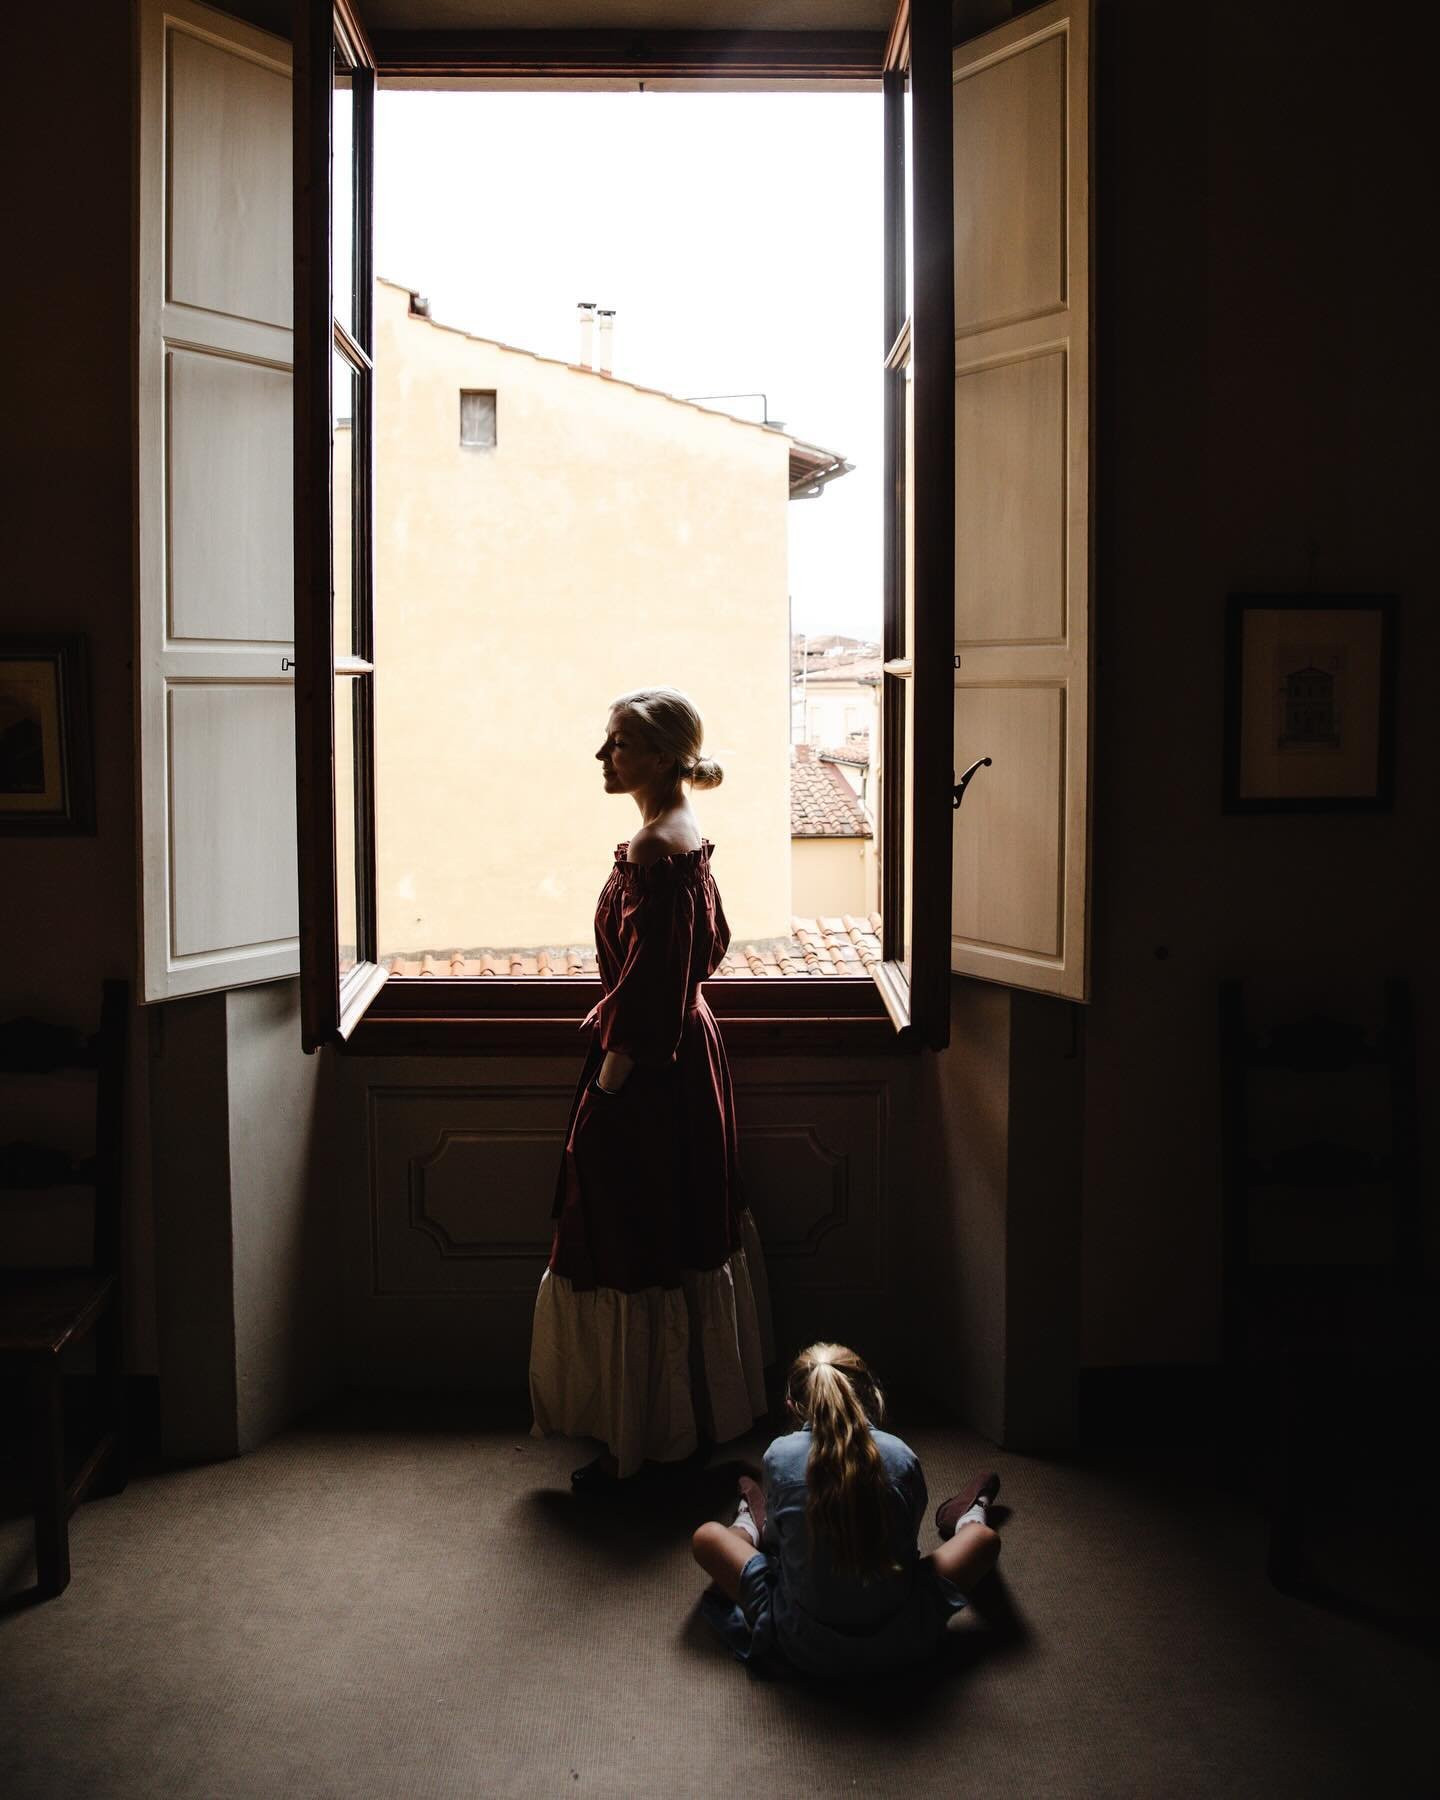 The duo. I posted this last autumn as we returned from time in Florence together, where I now host my fully immersive photography workshops. Ever since she was born she&rsquo;s joined me on my travels and for work, so when she asks for a bit of chees